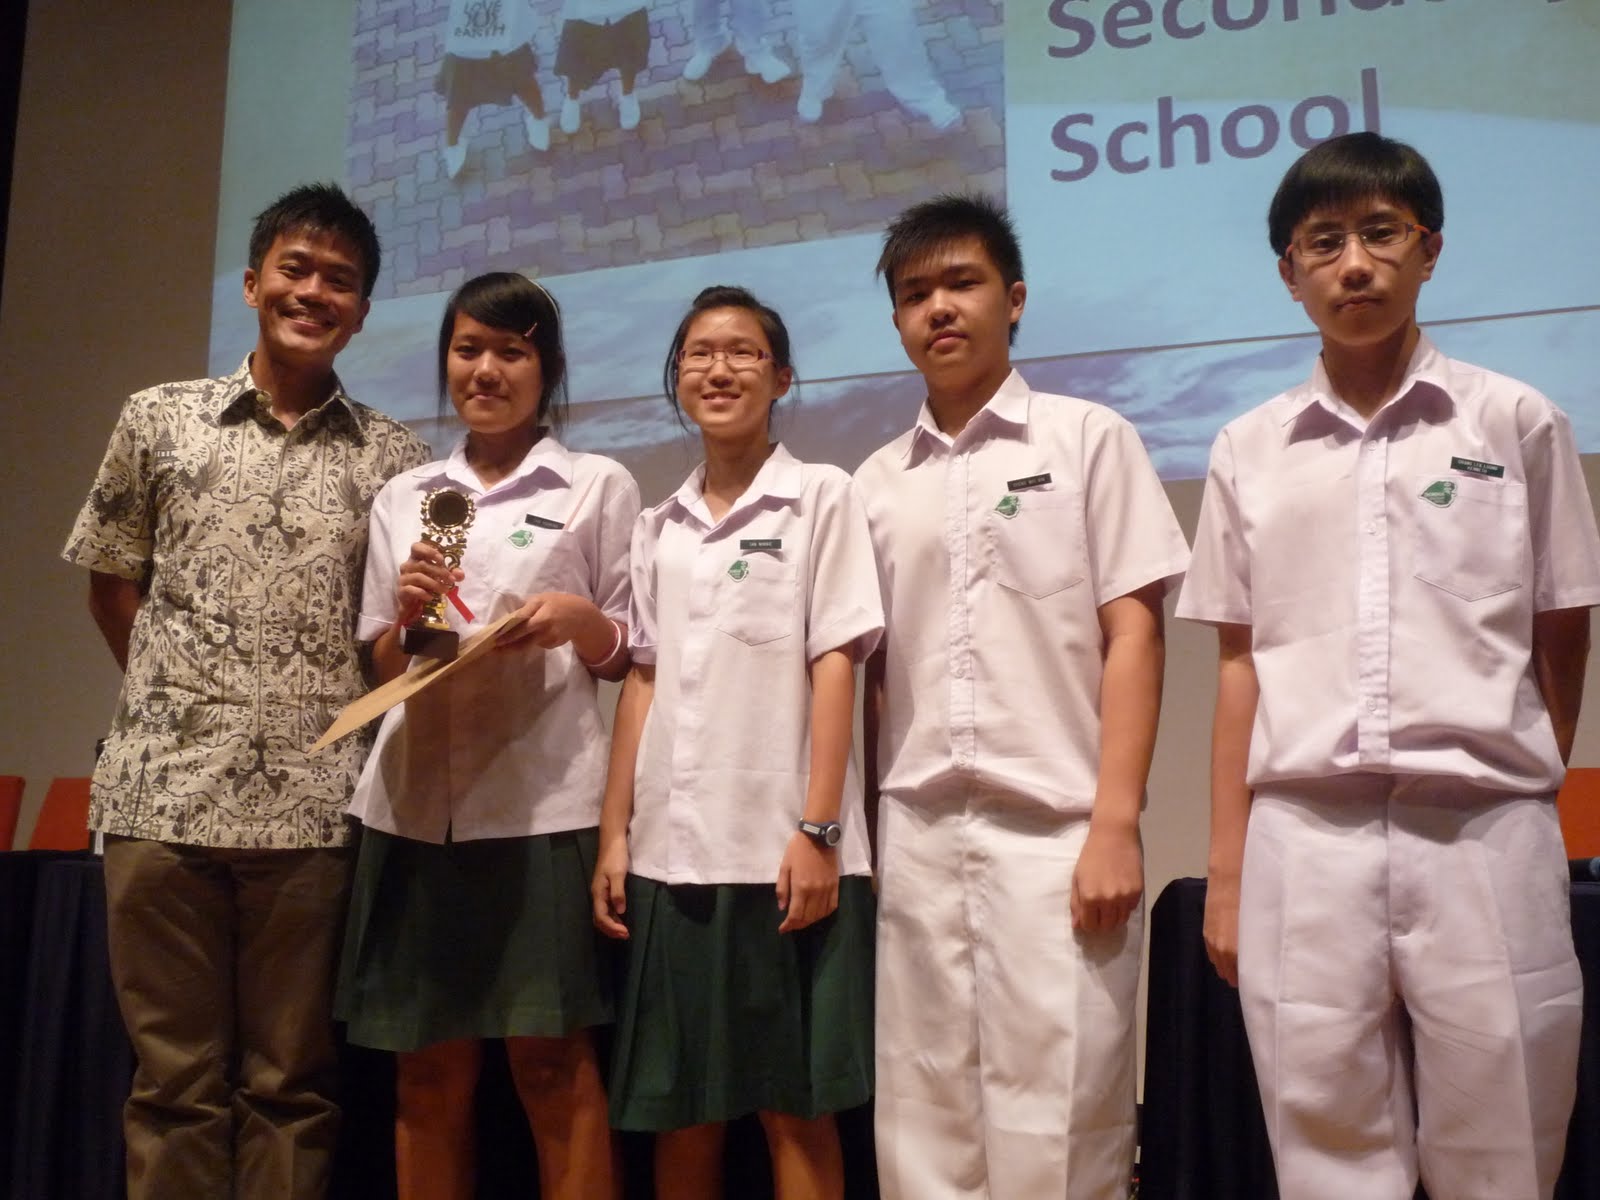 NUS Geography Challenge 2010: CONGRATS to our winners!